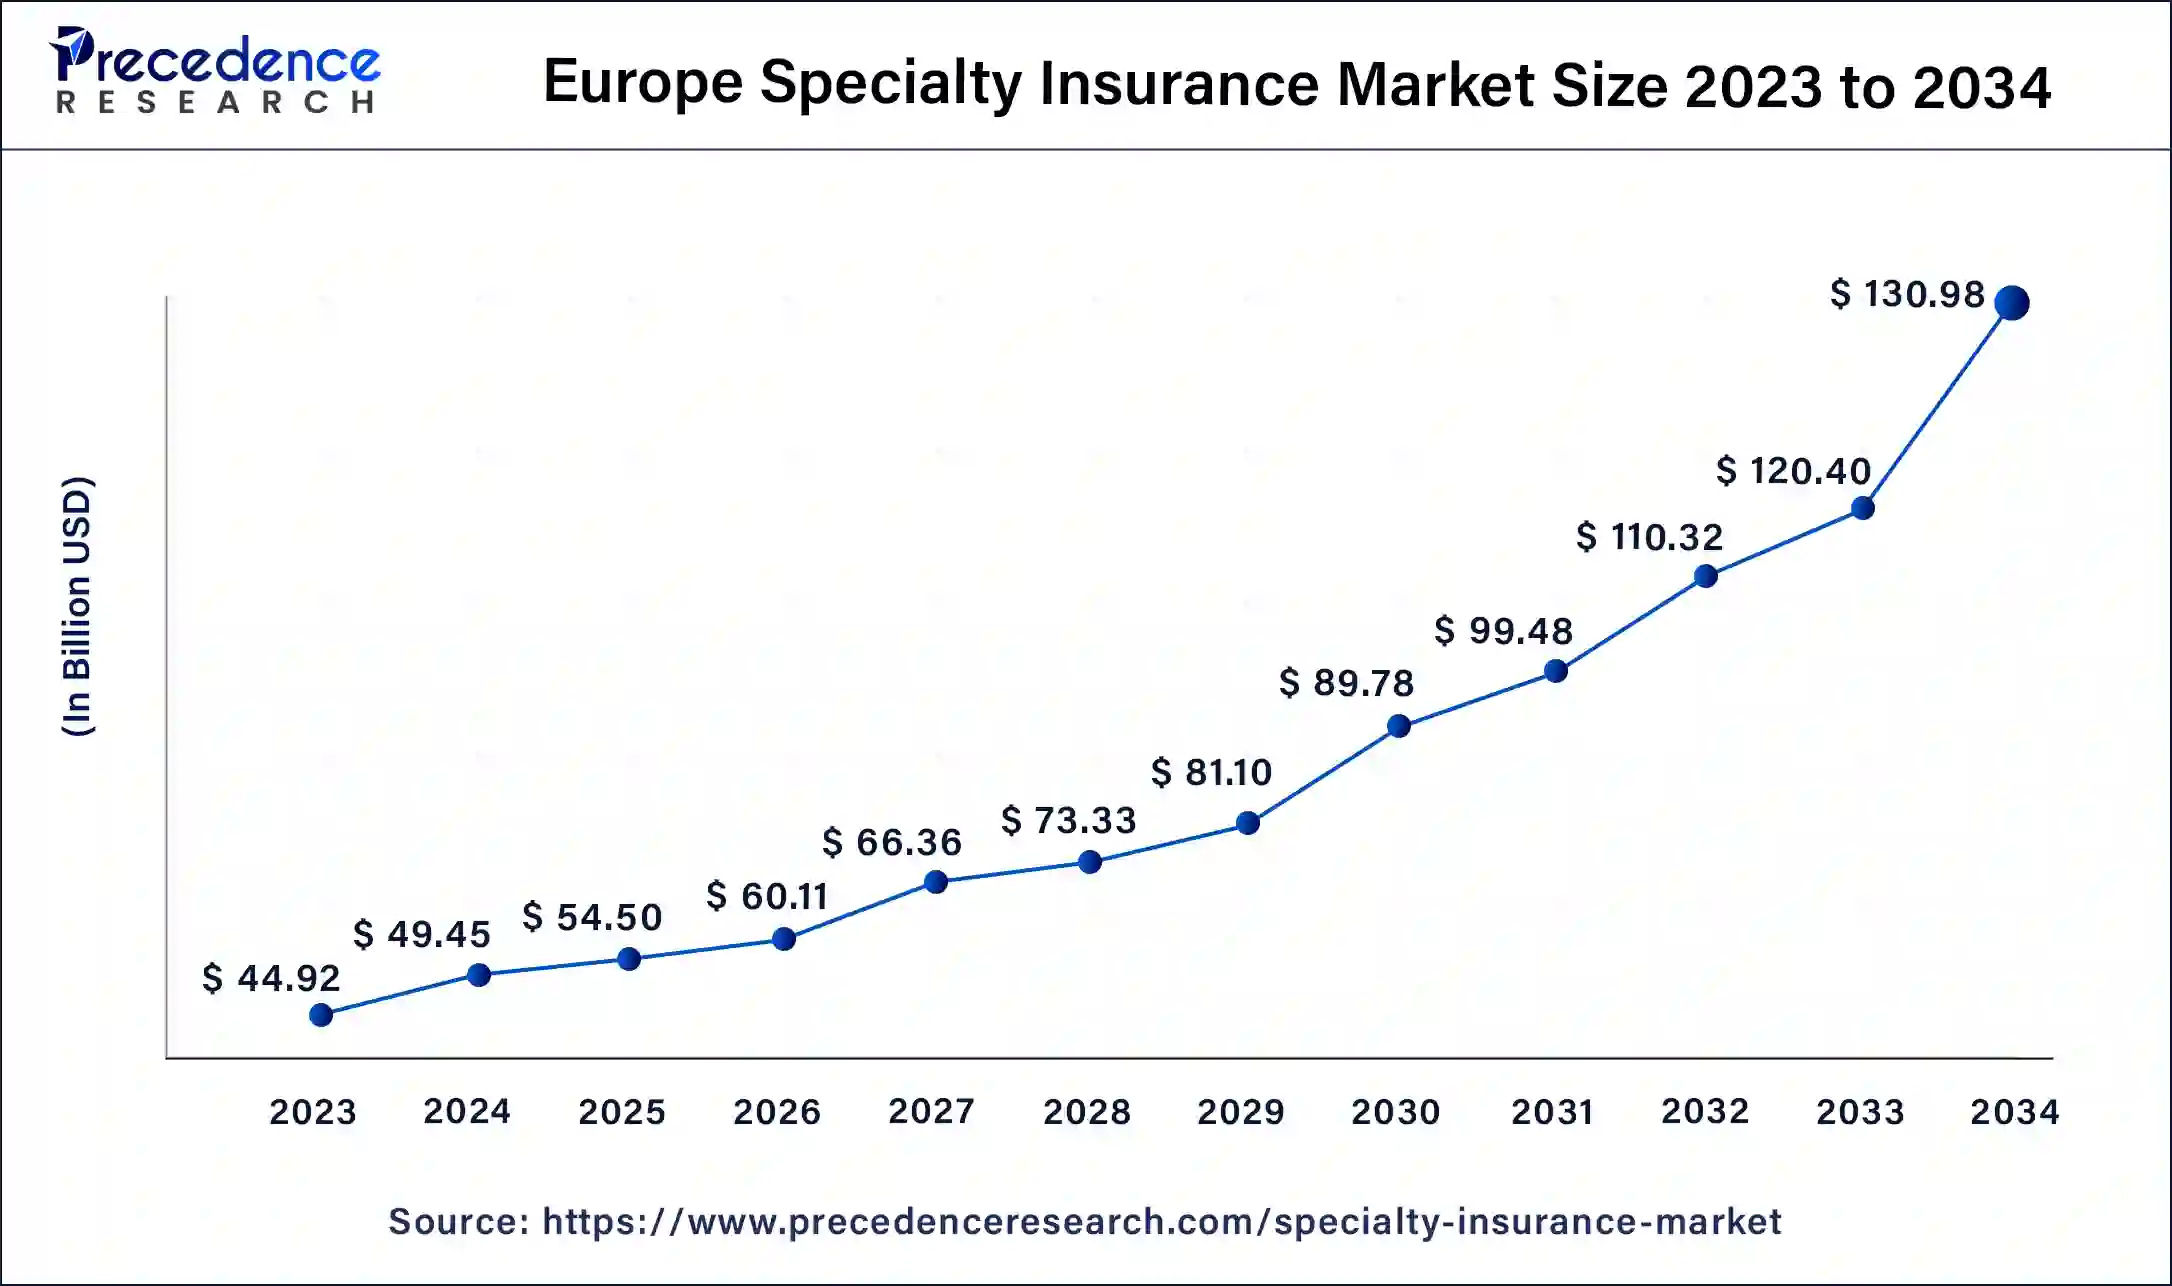 Europe Specialty Insurance Market Size 2024 To 2034